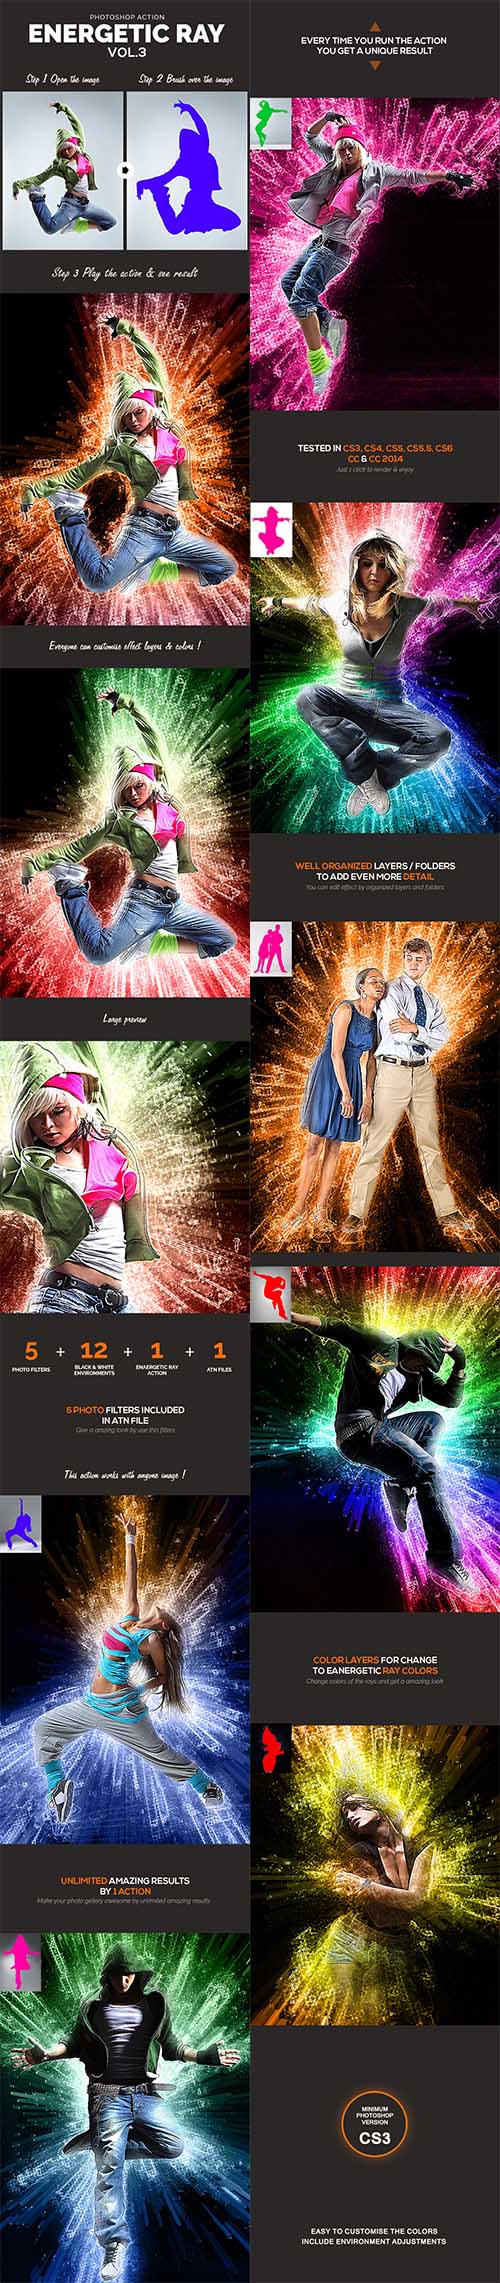 GraphicRiver - Energetic Ray 3 - Photoshop Action 10992617